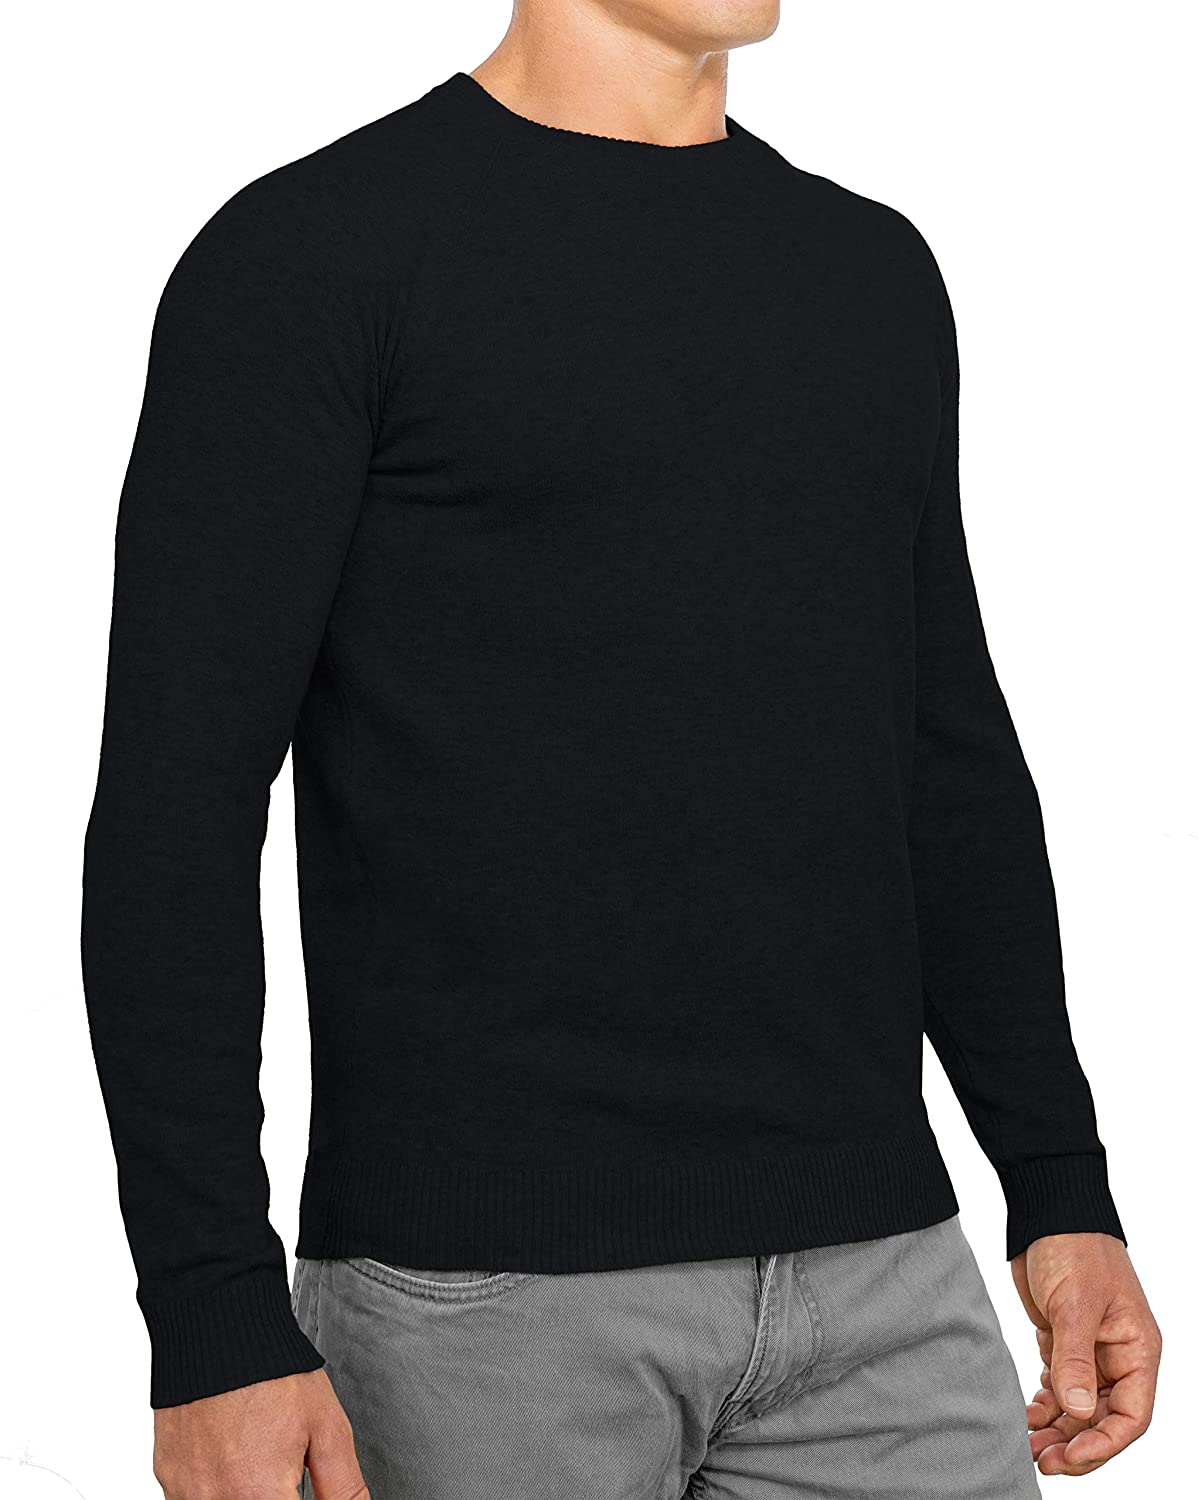 The Ripley Crew Neck Cotton Cashmere FITTED Sweater, Burberry Ripley  Colombia